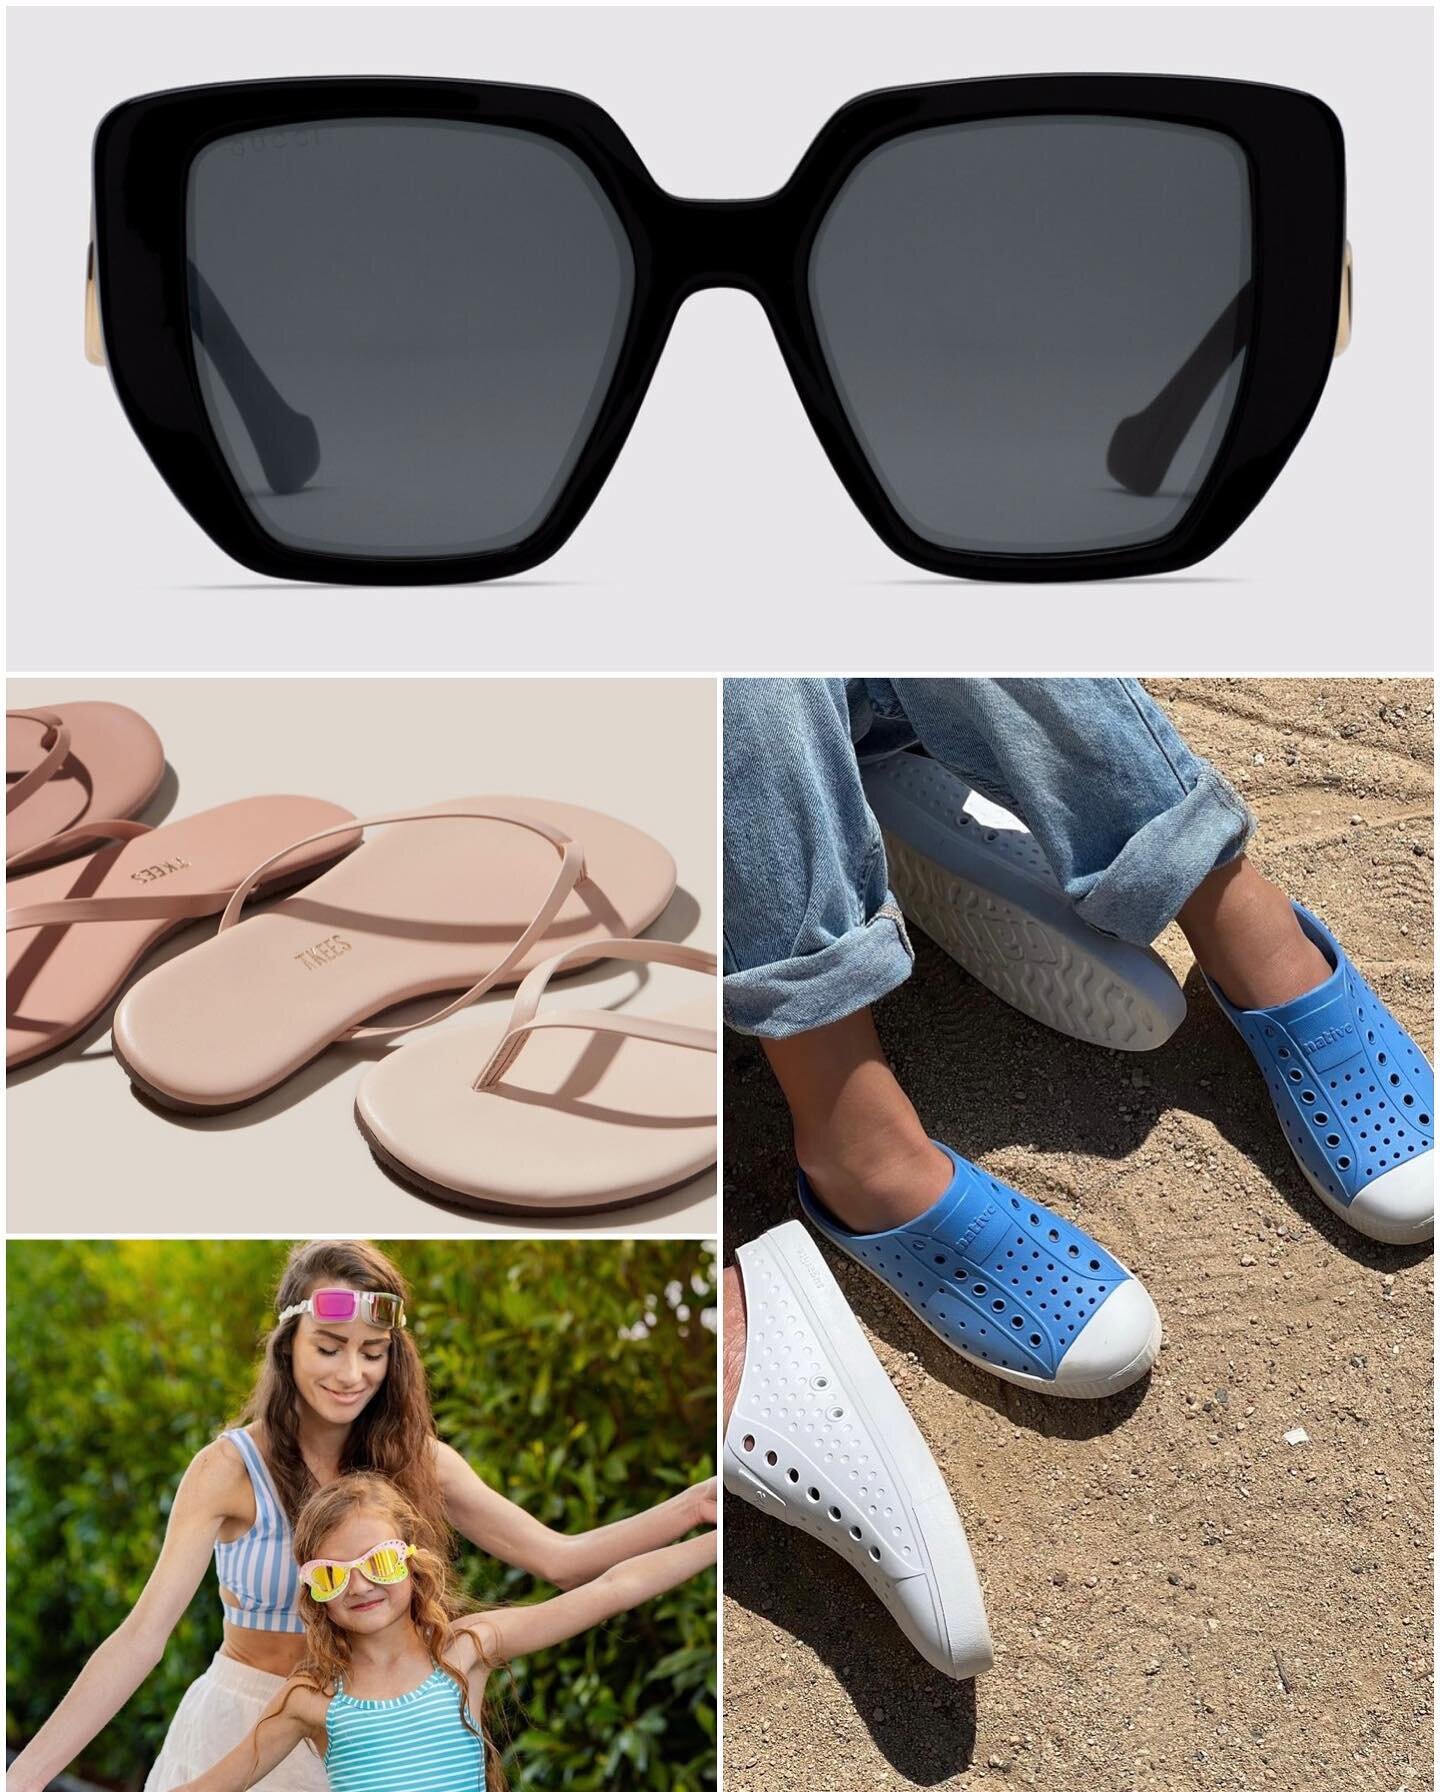 The summer countdown is on!!! Stop in for all of the summer essentials: flip flops, goggles, sunglasses, Natives, and more!! #summer #summerstyle #summerfashion #janeysat2500 #janeys #shoplocalamarillo #amarillotx #supportlocalbusiness #shoplocal #am